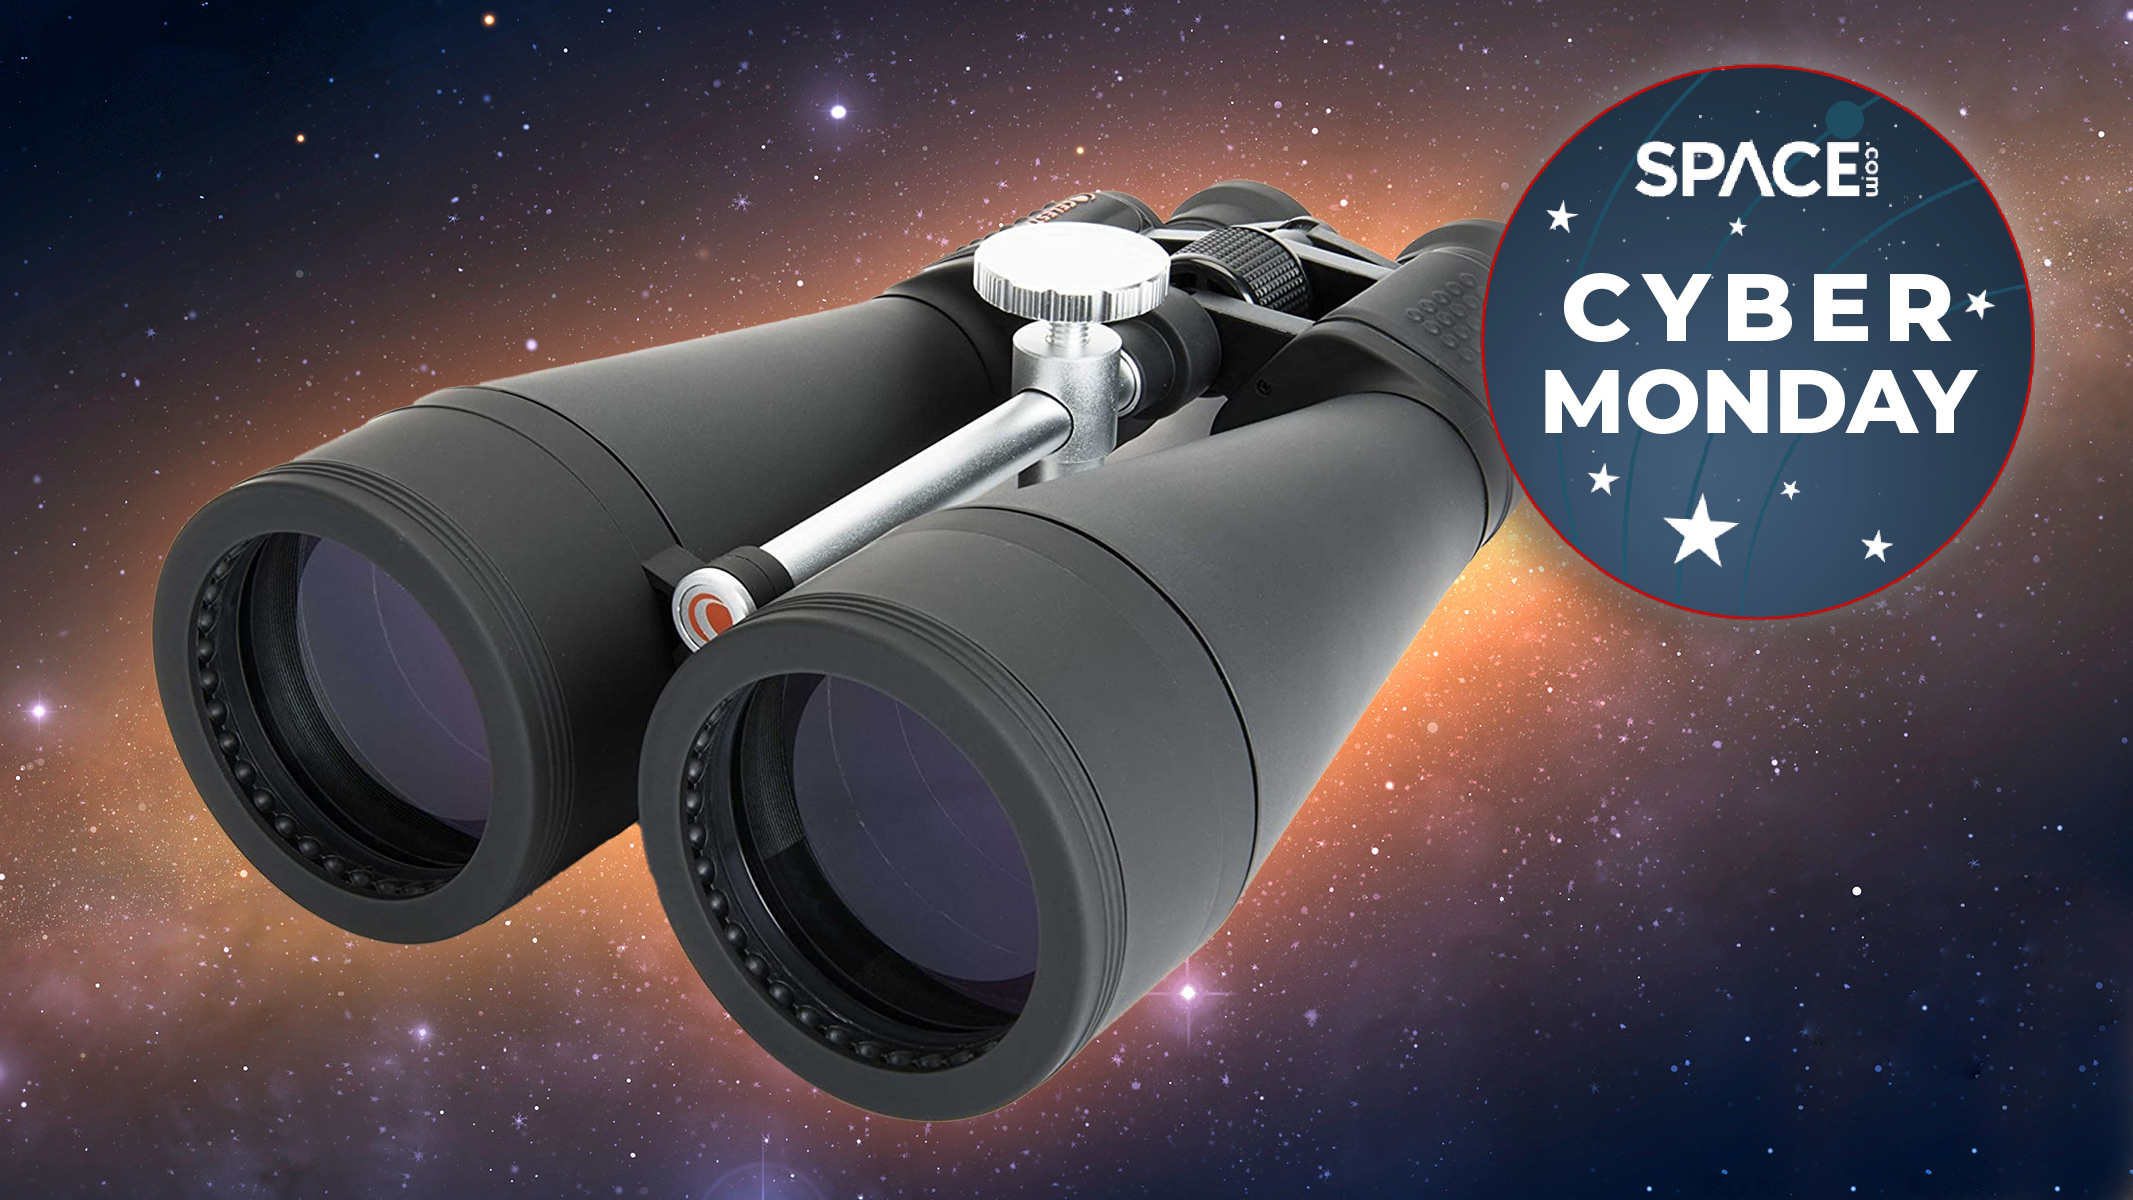 These binoculars can reveal the stars: Now they're $65 off for Cyber Monday